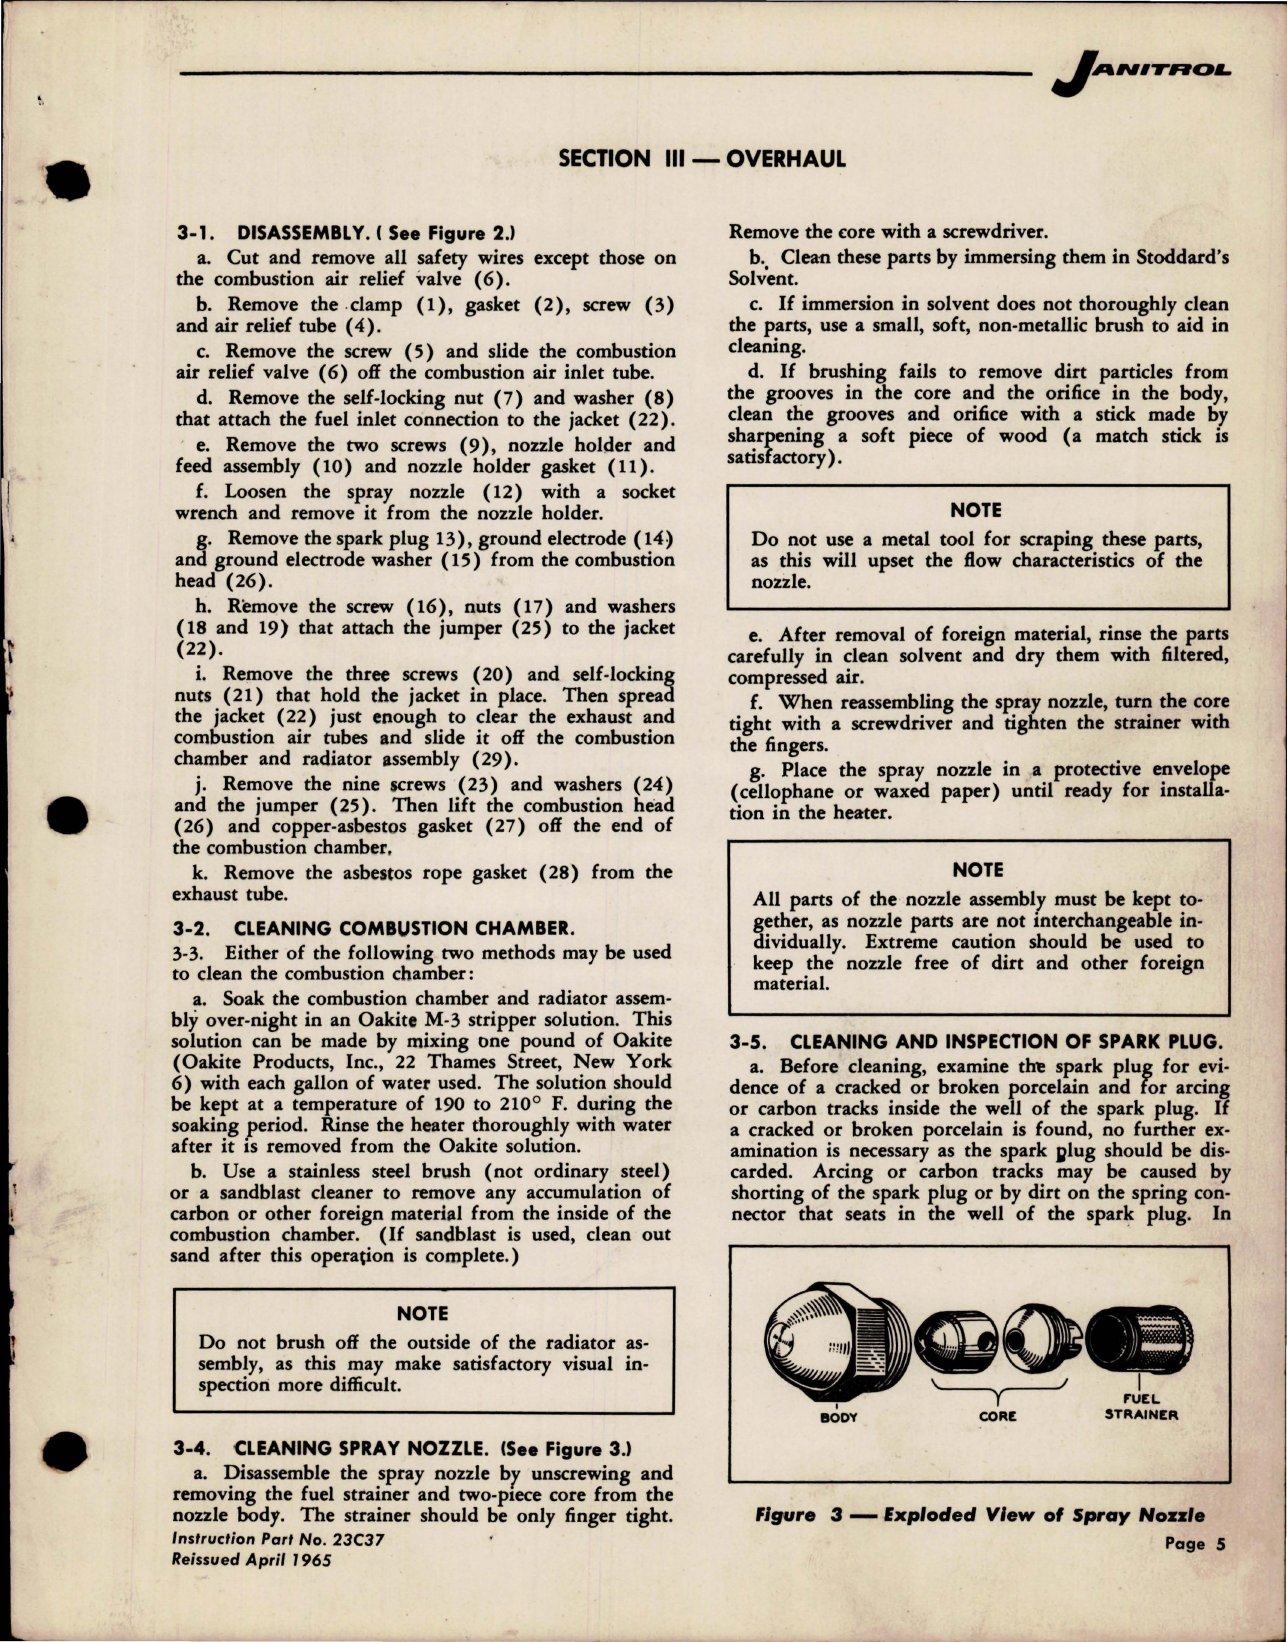 Sample page 5 from AirCorps Library document: Maintenance Instructions for Aircraft Heaters S-25 Series - Parts 15C54, B15C54, C15C54 